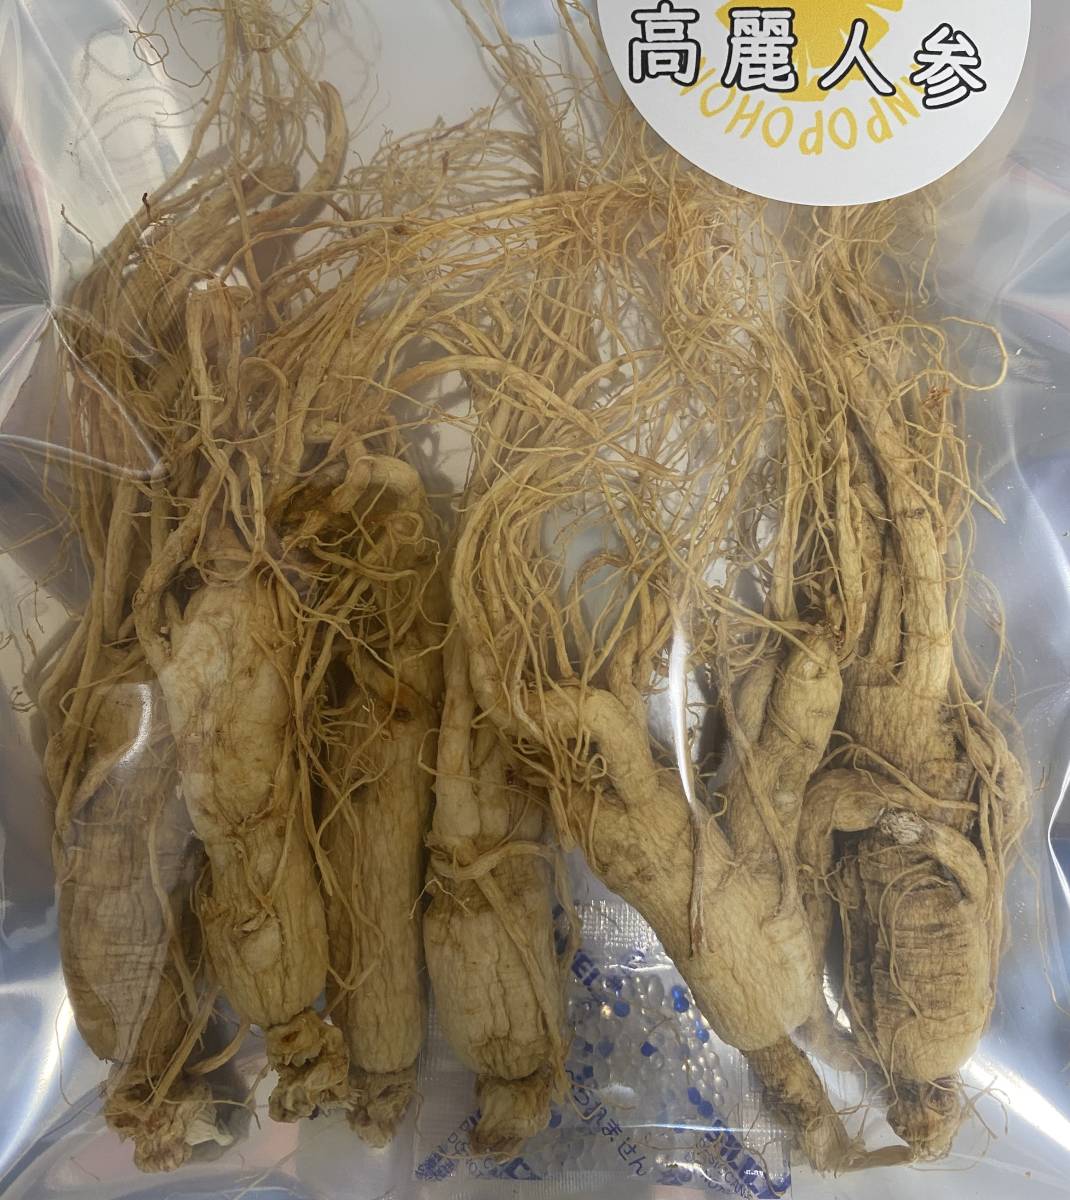 8 year root Goryeo carrot 100g Goryeo carrot sake three chicken hot water . raw environment . ground cultivation Goryeo carrot morning . carrot 